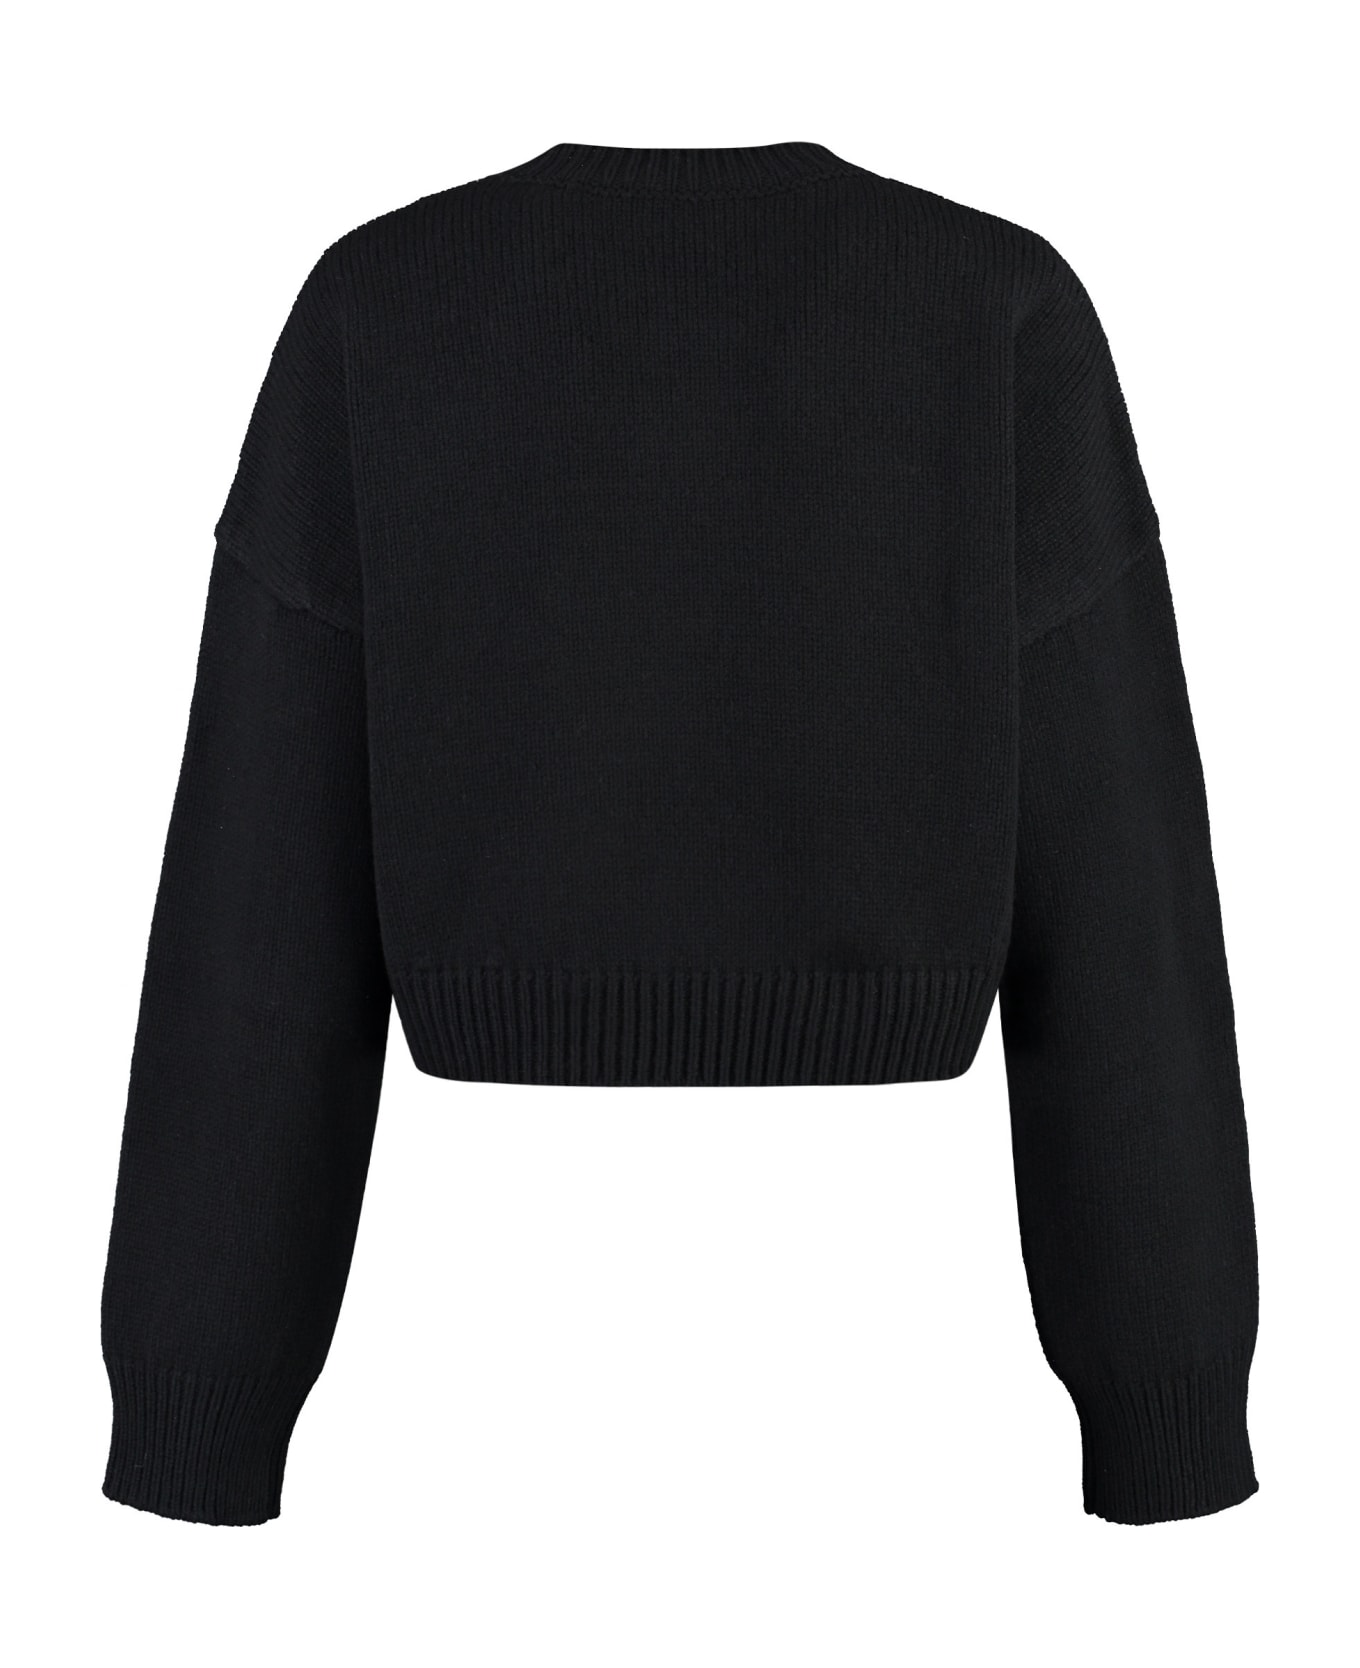 Dolce & Gabbana Virgin Wool And Cashmere Pullover - black